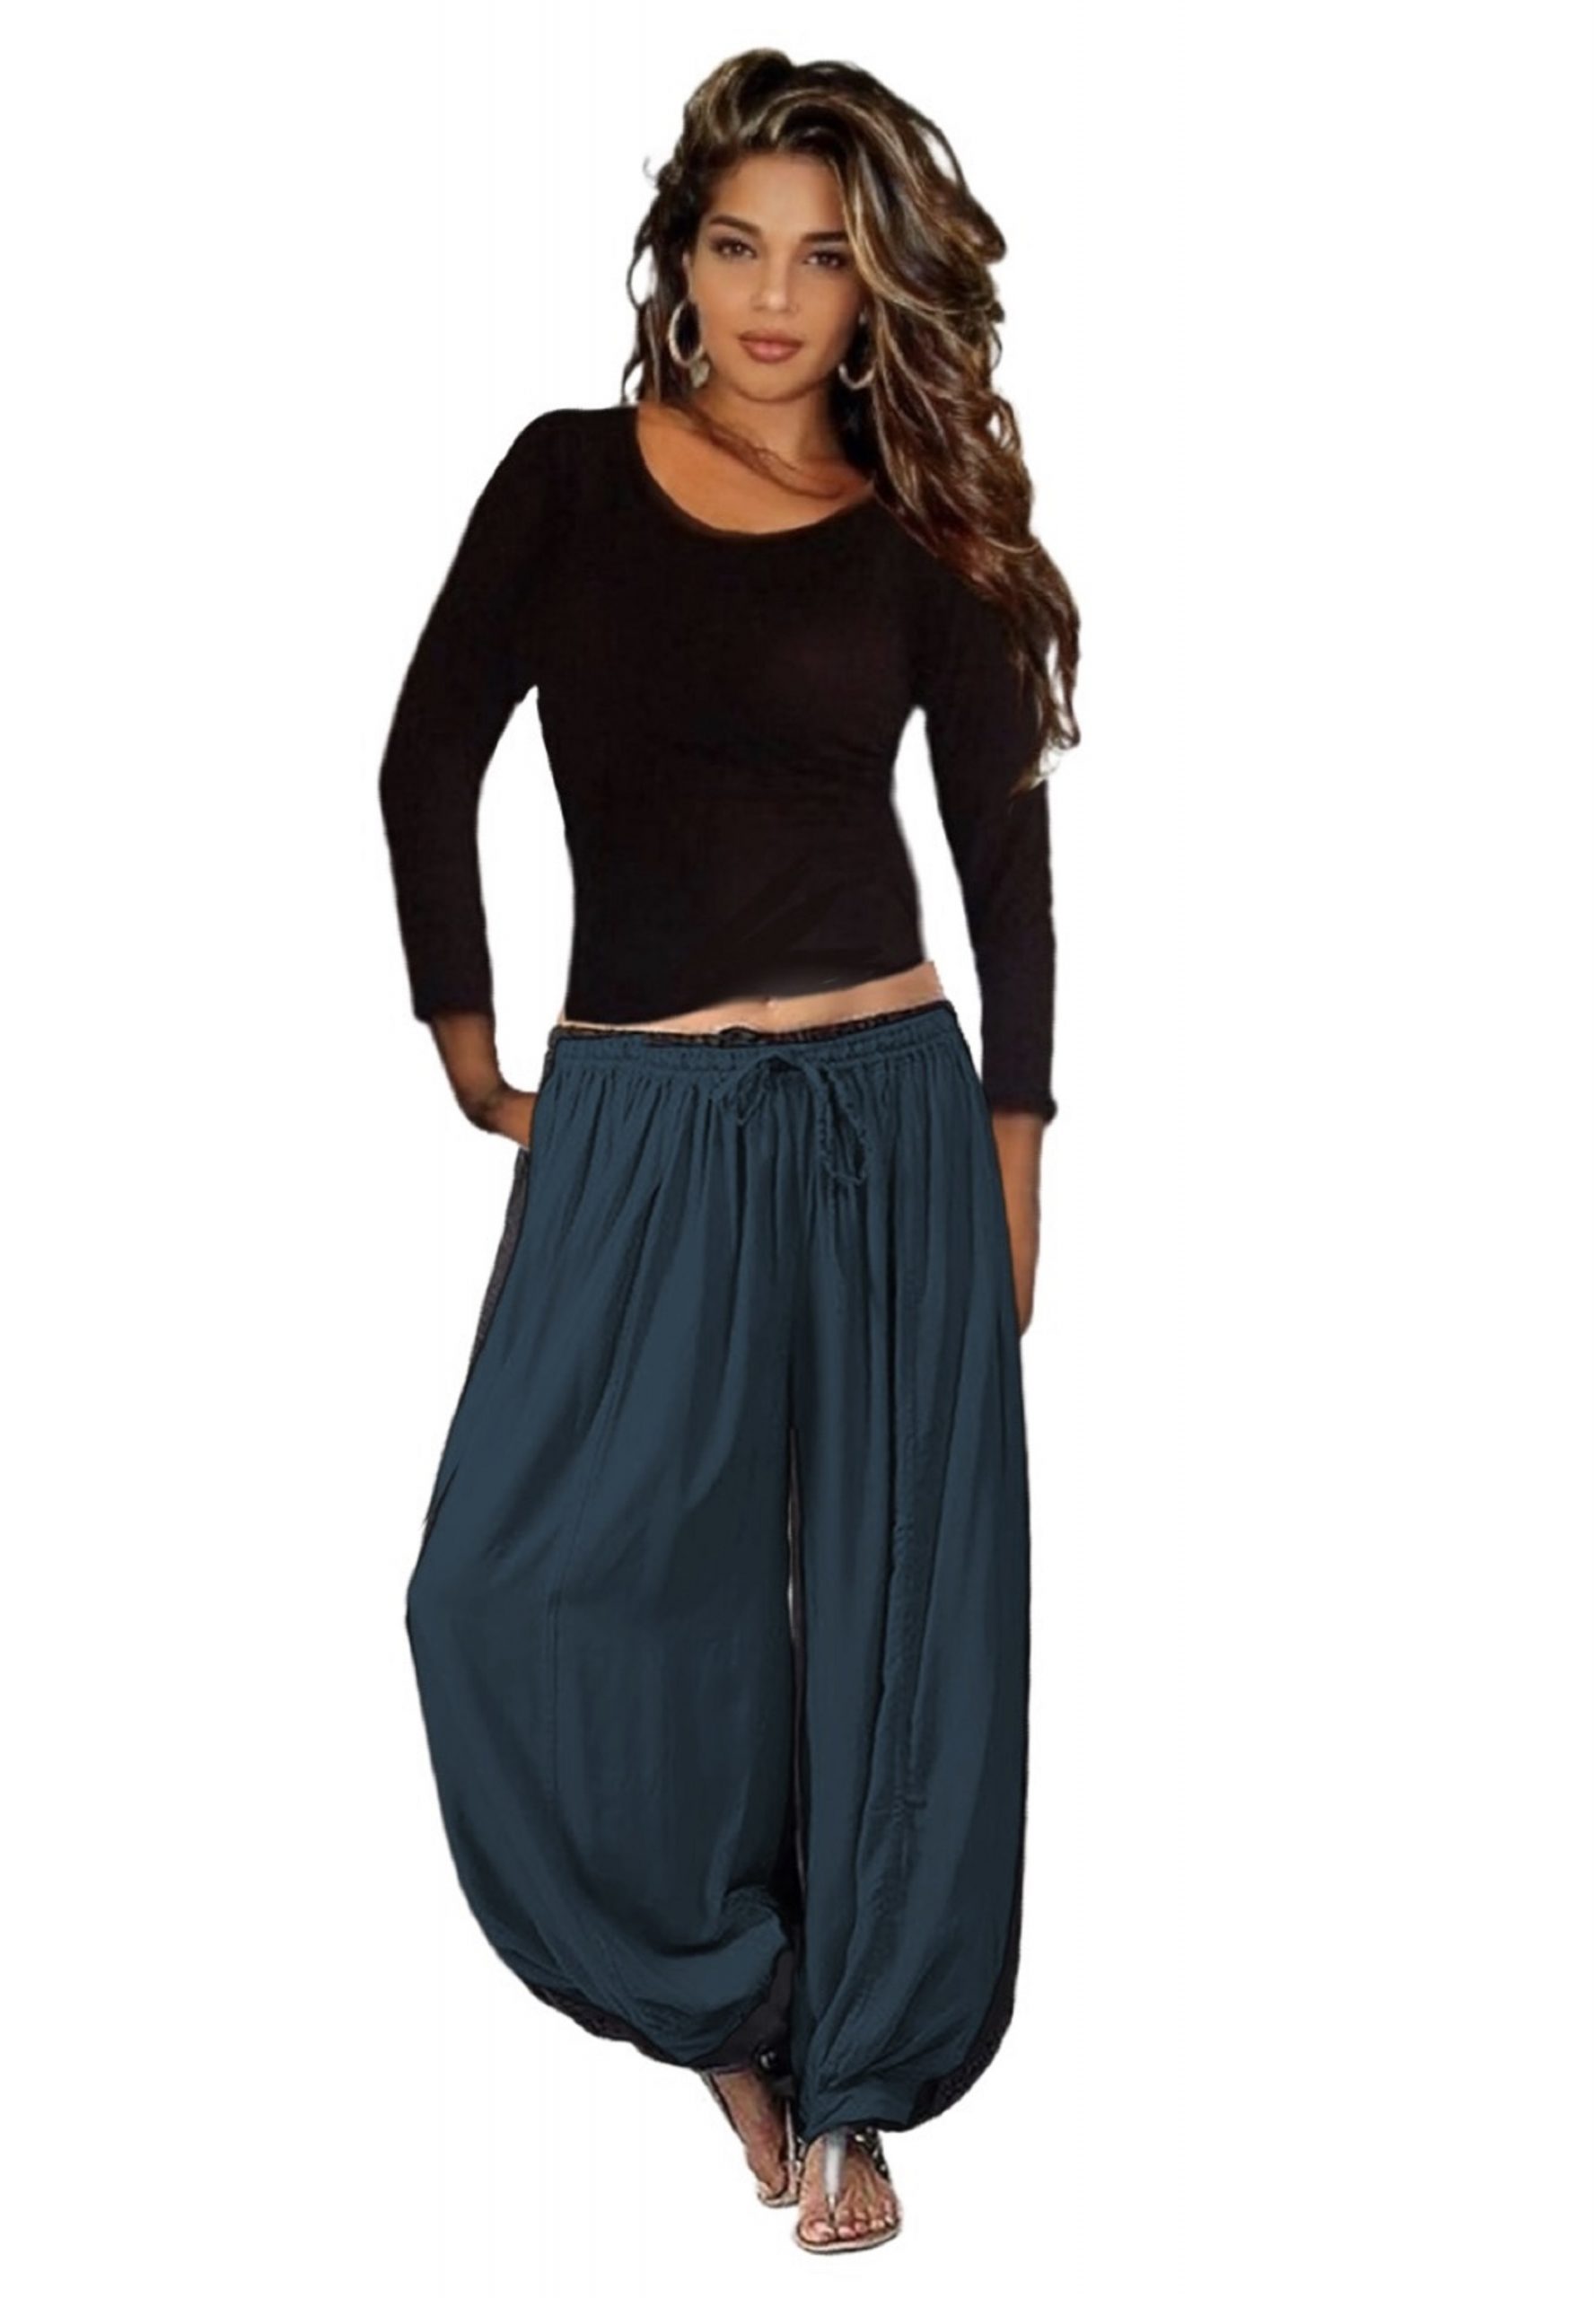 Men's and Women's Cotton Harem Yoga Trousers Baggy Hippie Casual Genie Pant  (Multicolour, Free Size) at Rs 190/piece | Adarsh Nagar | Jaipur | ID:  21706384030